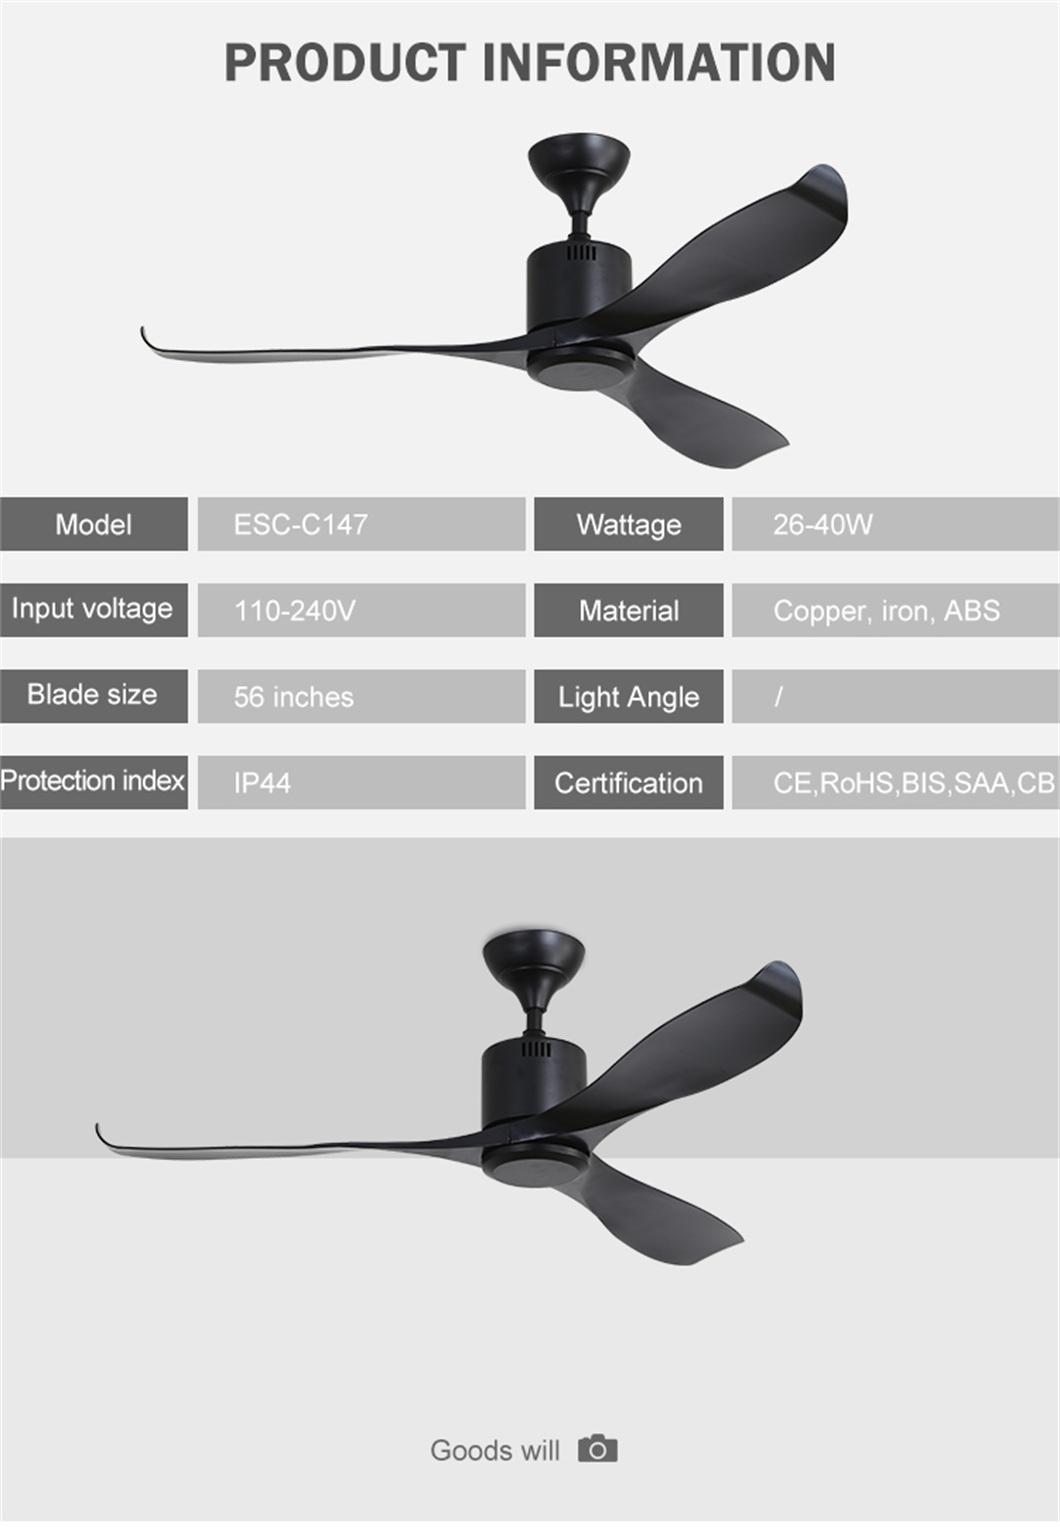 Simple Design Save Energy Silent 3 Fan Speed 56 Inch ABS Blade Light Ceiling Fan